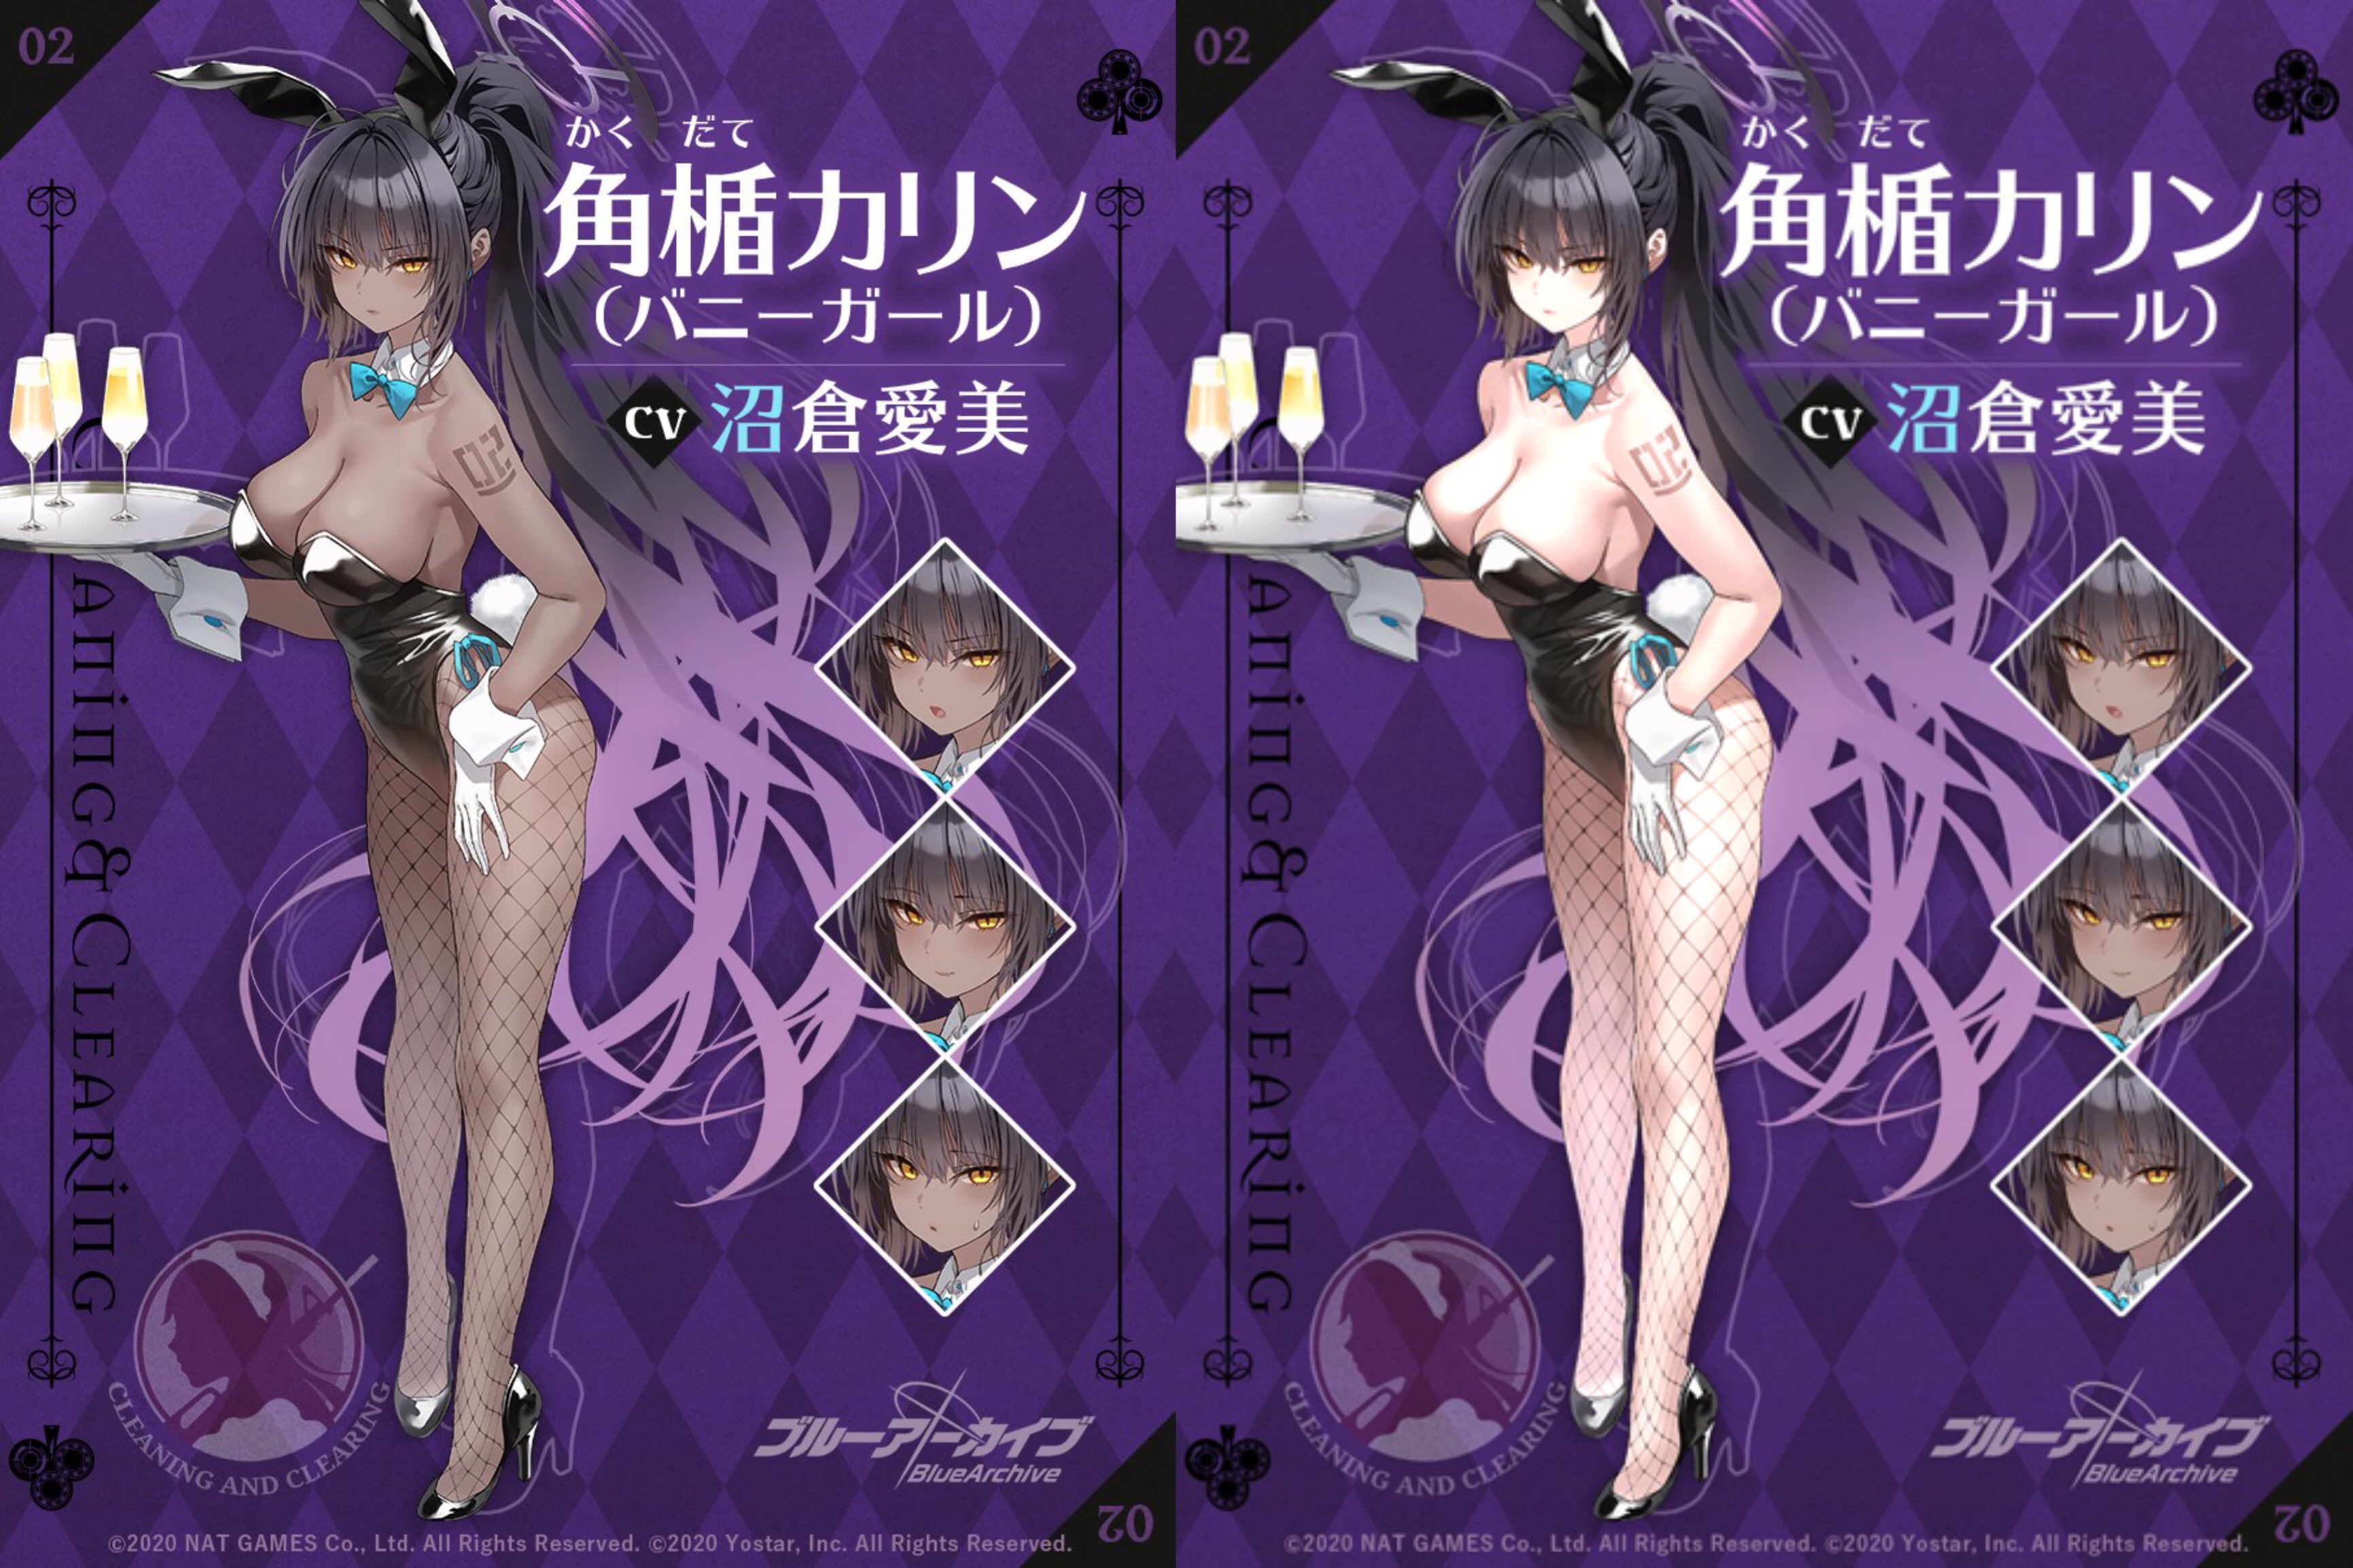 【Image】Bunny characters in the Blue Archive, buzz and erotic pictures increase 5